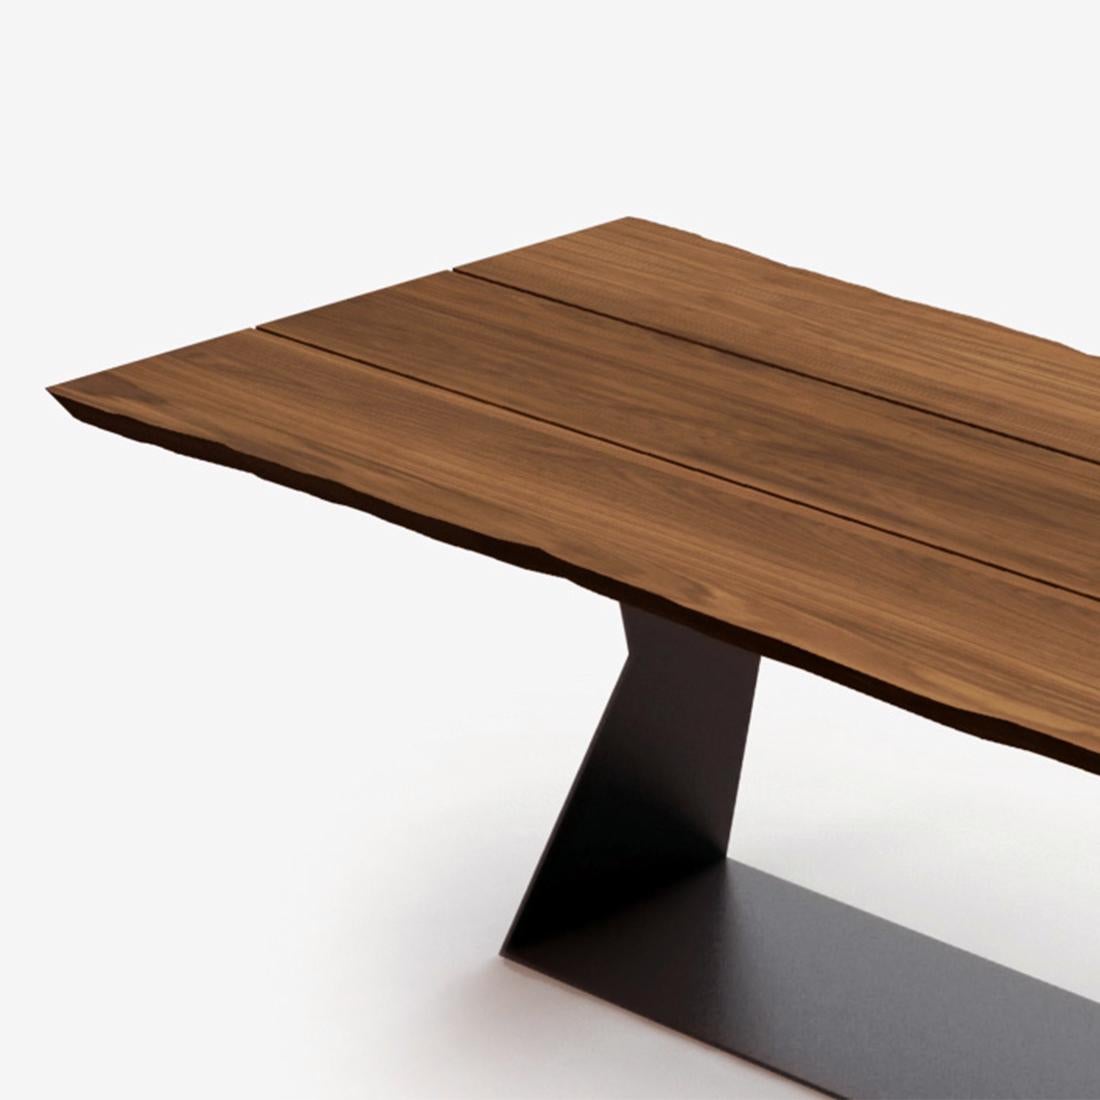 Dining table umbra with solid walnut wood top 
with 3 slats with middle gaps and with natural 
edges, with lacquered iron base.
Also available on request with solid oak top.
Also available on request in:
L200xD100xH76cm, price: